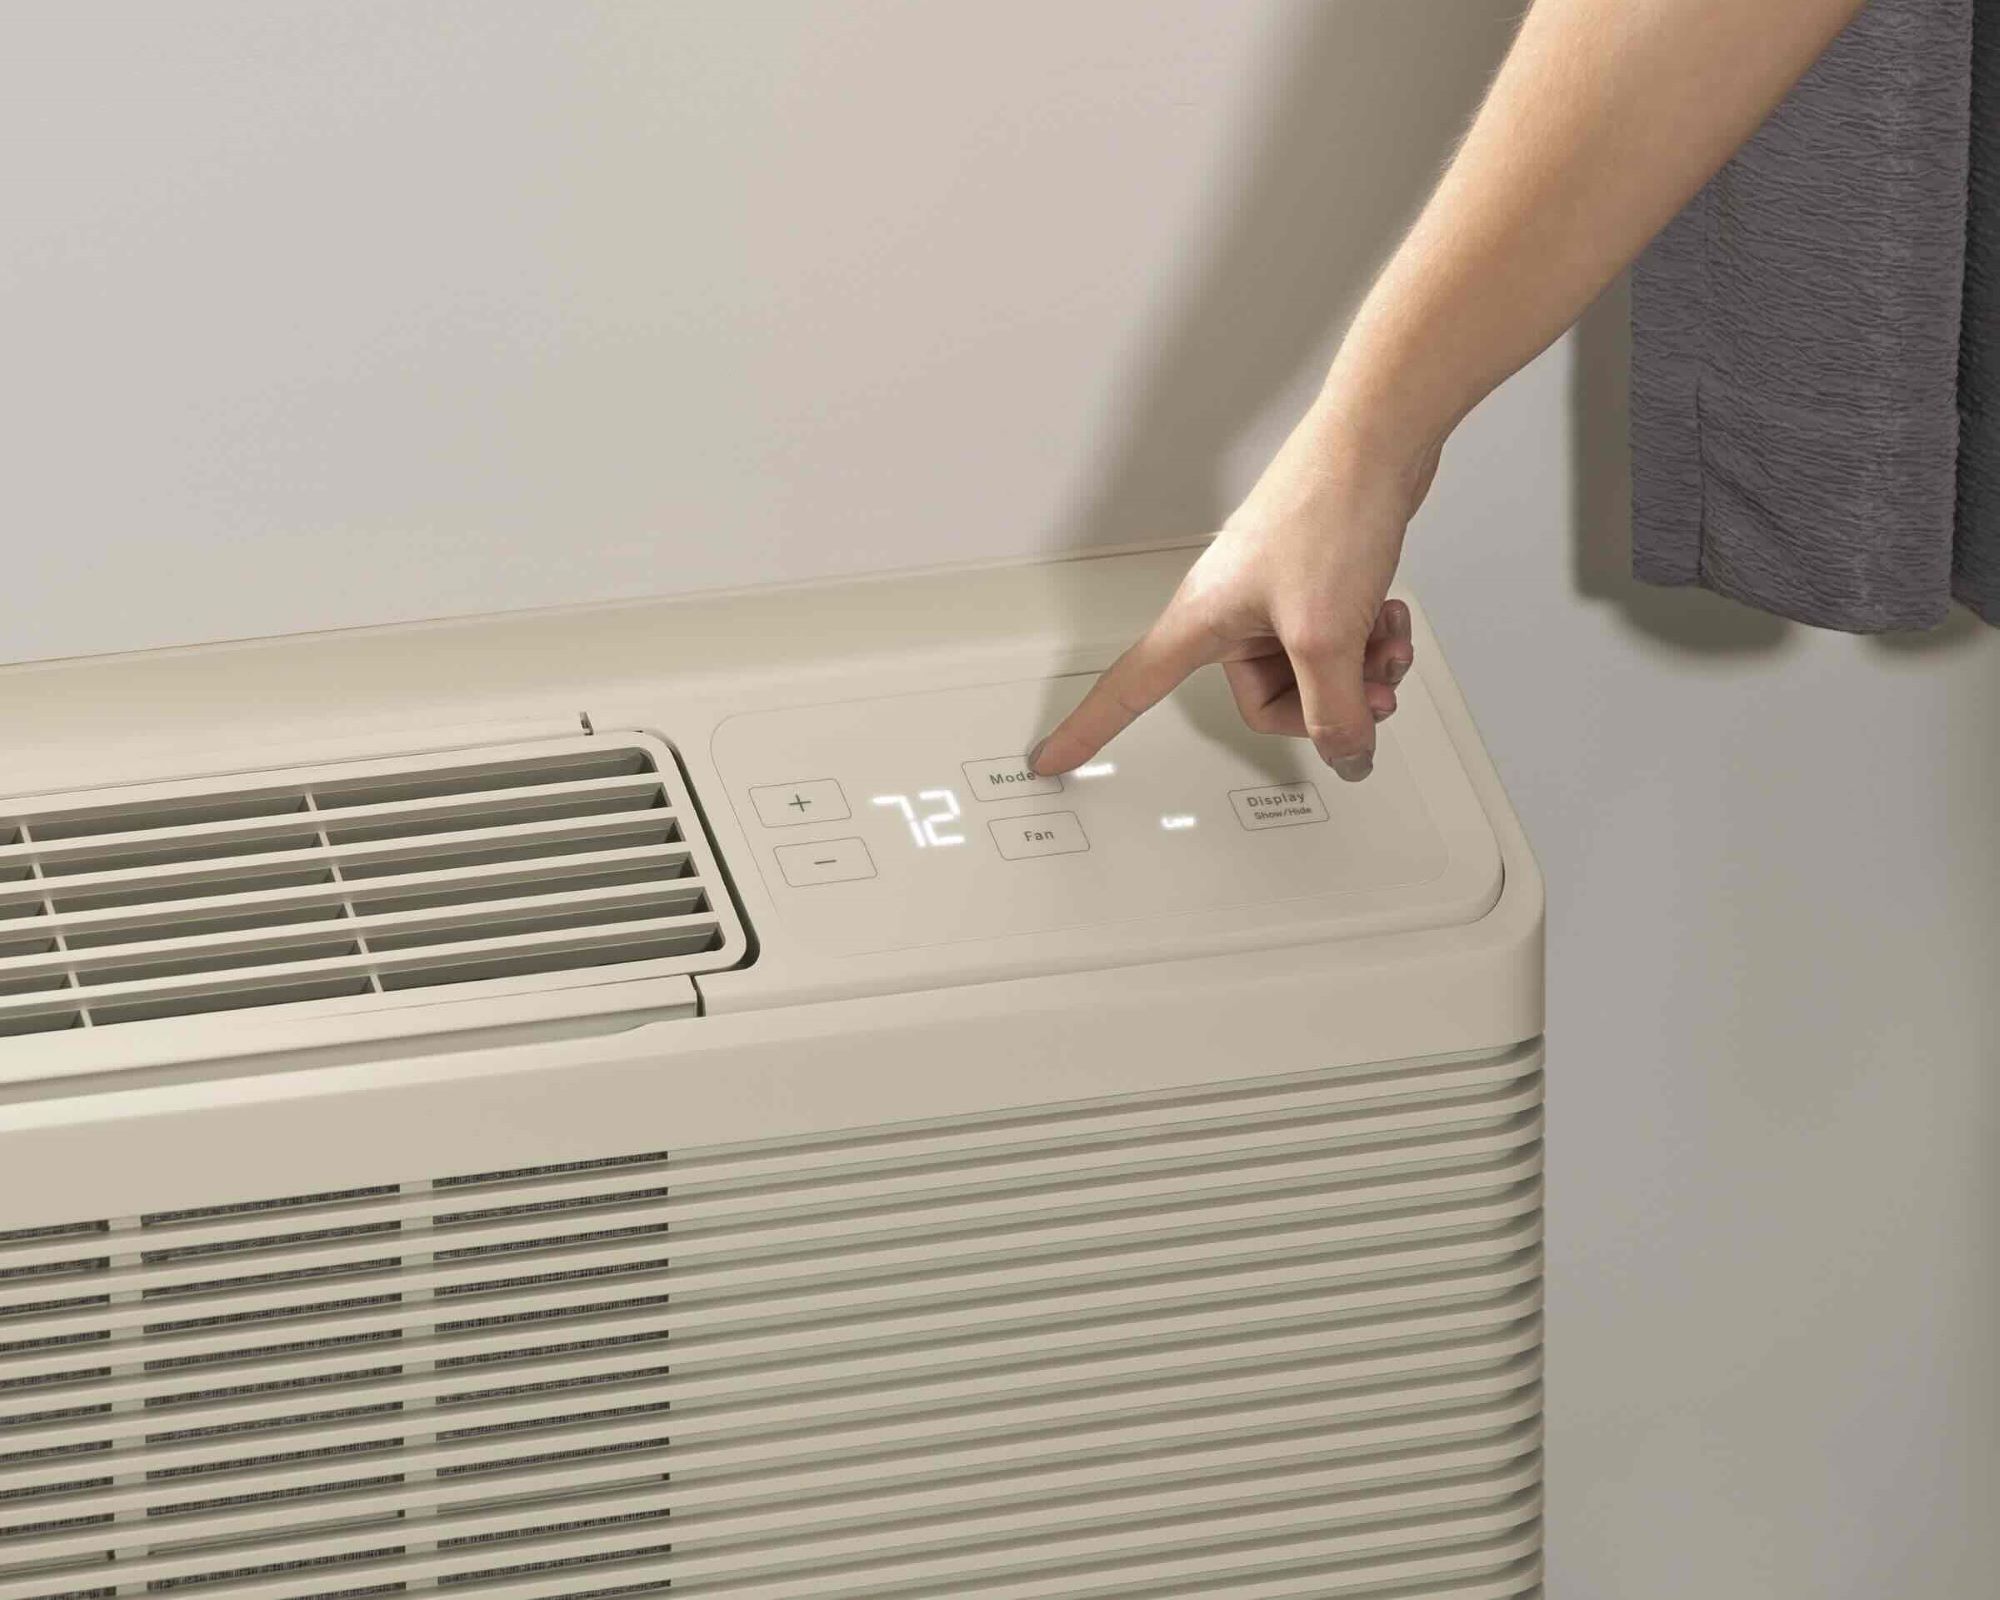 How To Turn Off Hotel Air Conditioner